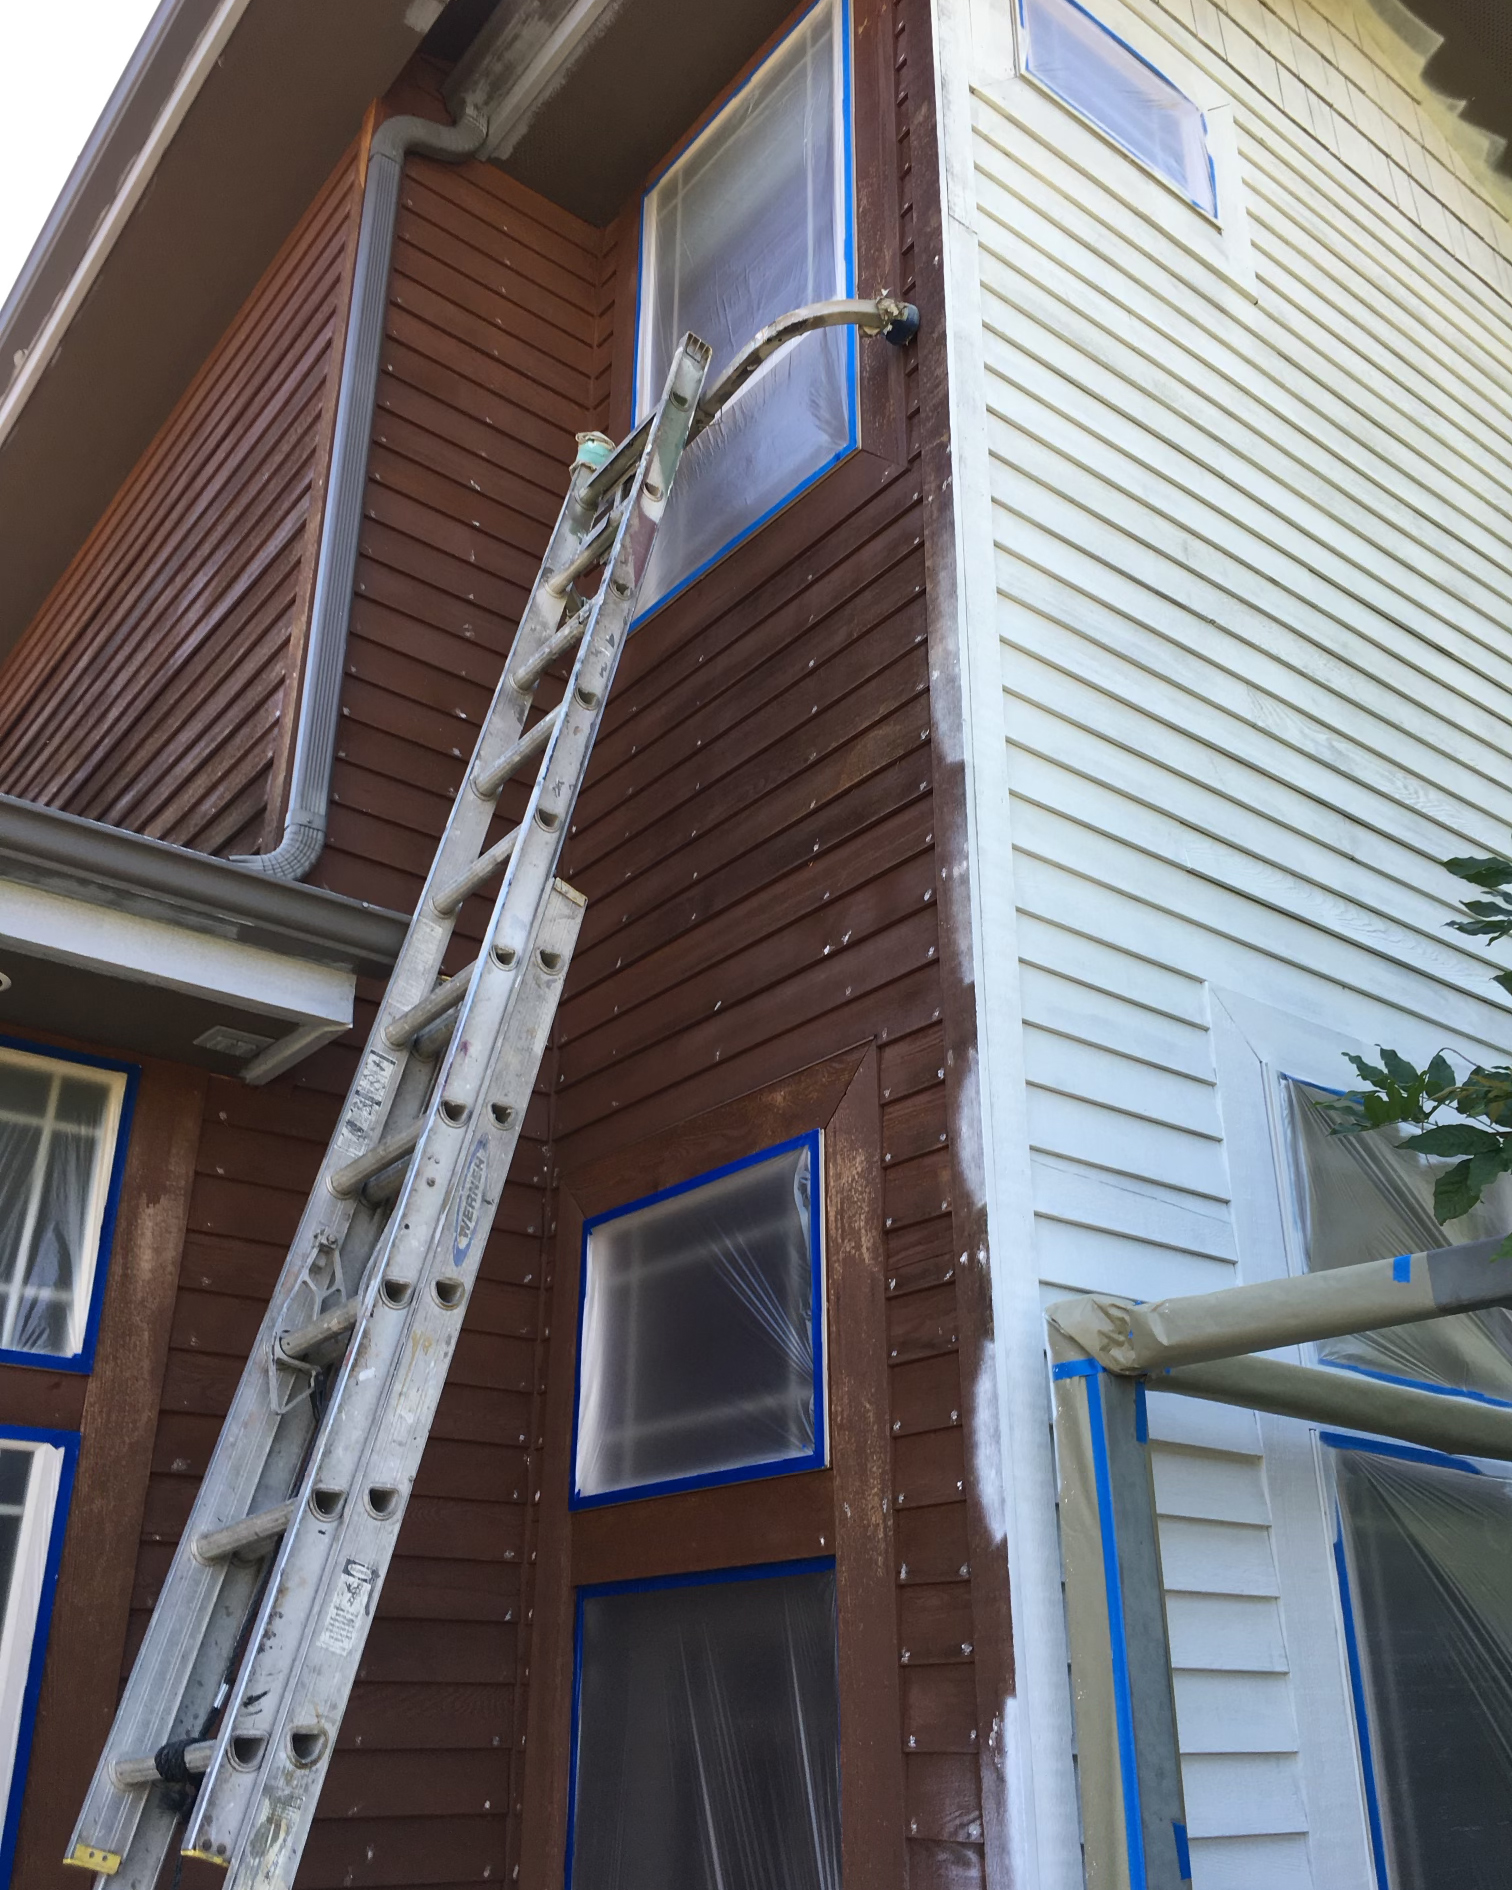 Exterior or residential home showing painting work by RP Painting in progress